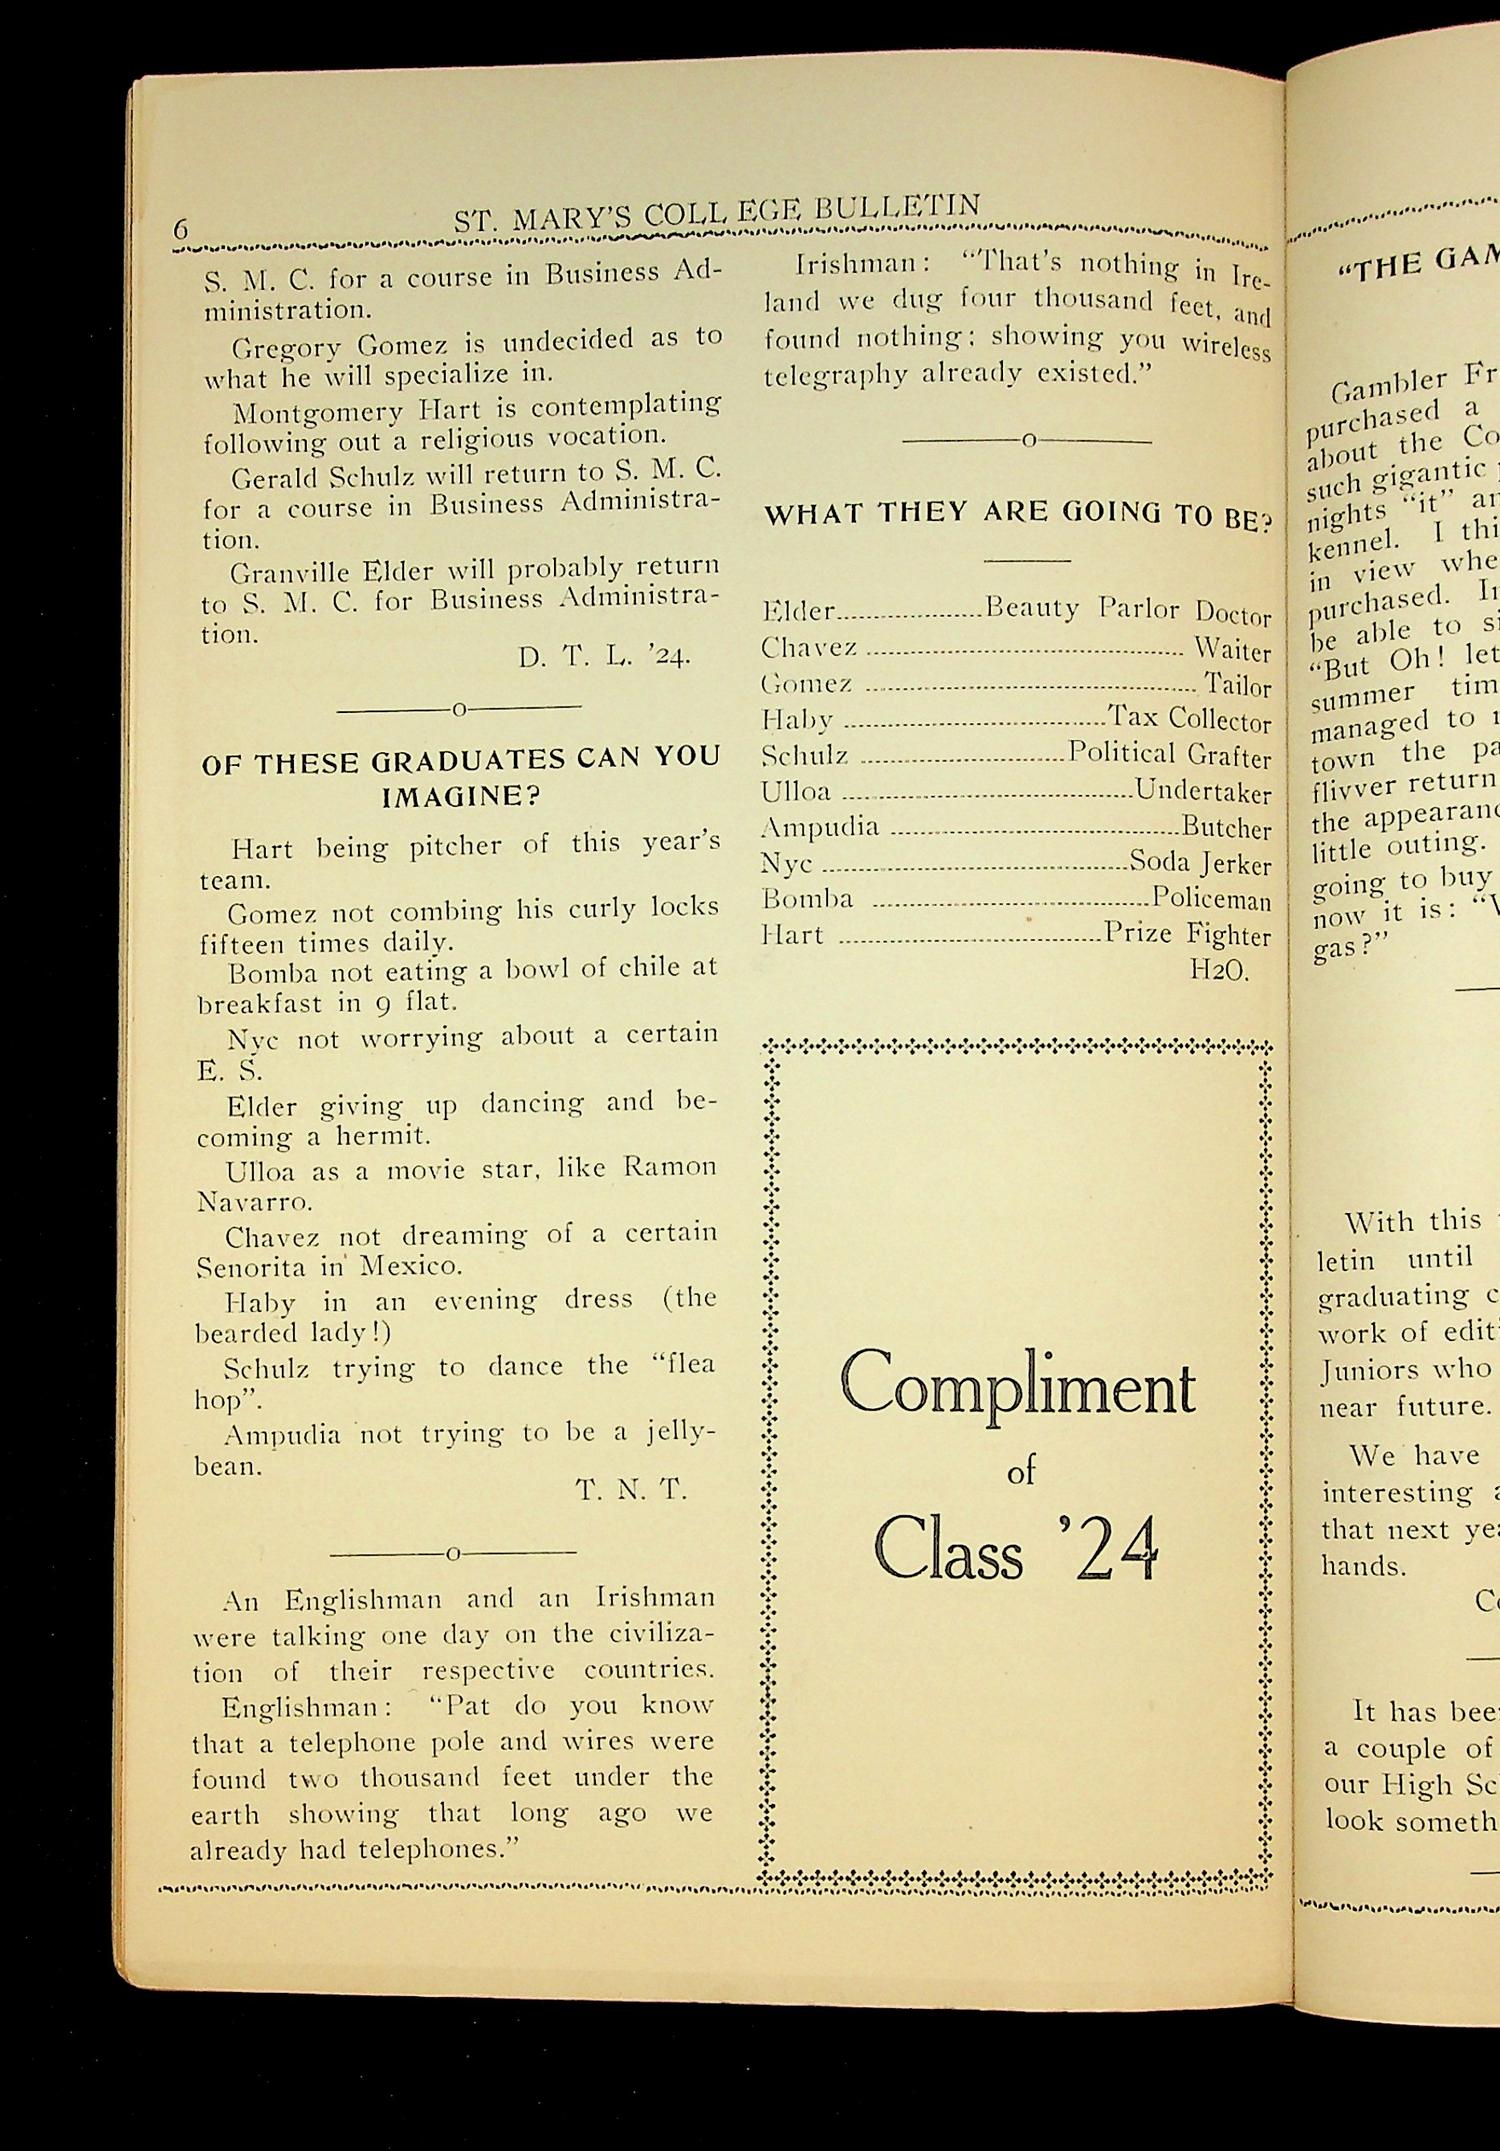 St. Mary's College Bulletin (San Antonio, Tex.), Vol. 5, No. 8, Ed. 1, May 1924
                                                
                                                    [Sequence #]: 8 of 16
                                                